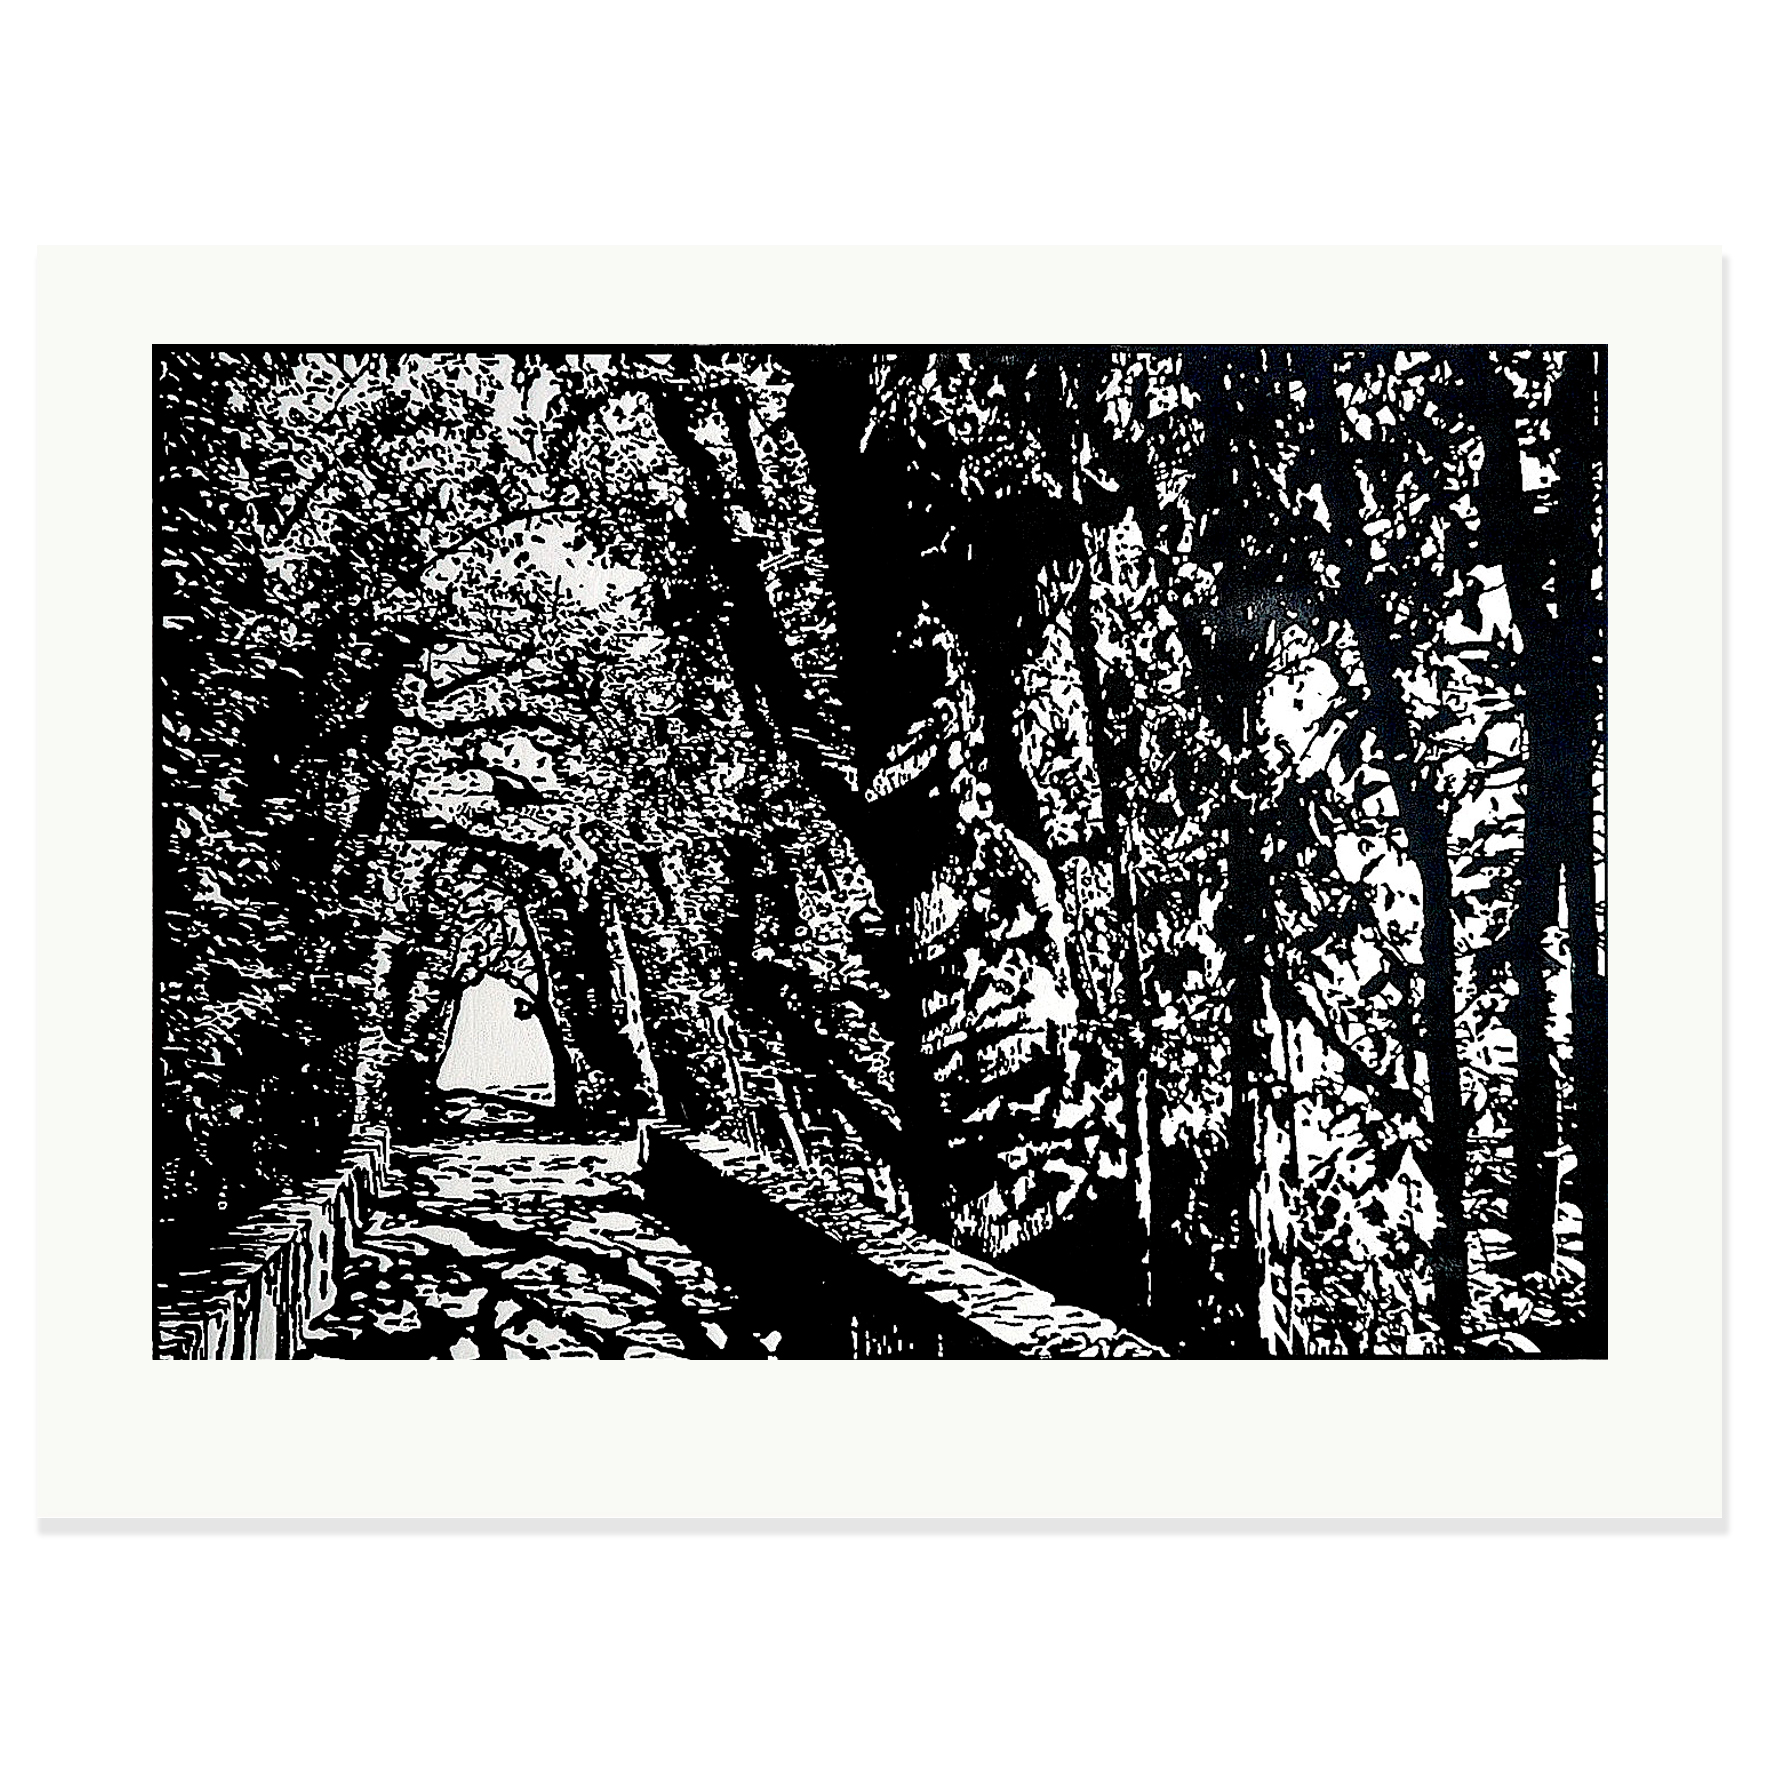 Graham Marchant: Boboli Gardens, Florence, A/P. A print from this edition was exhibited as finalist in the 2014 Silk Cut Award